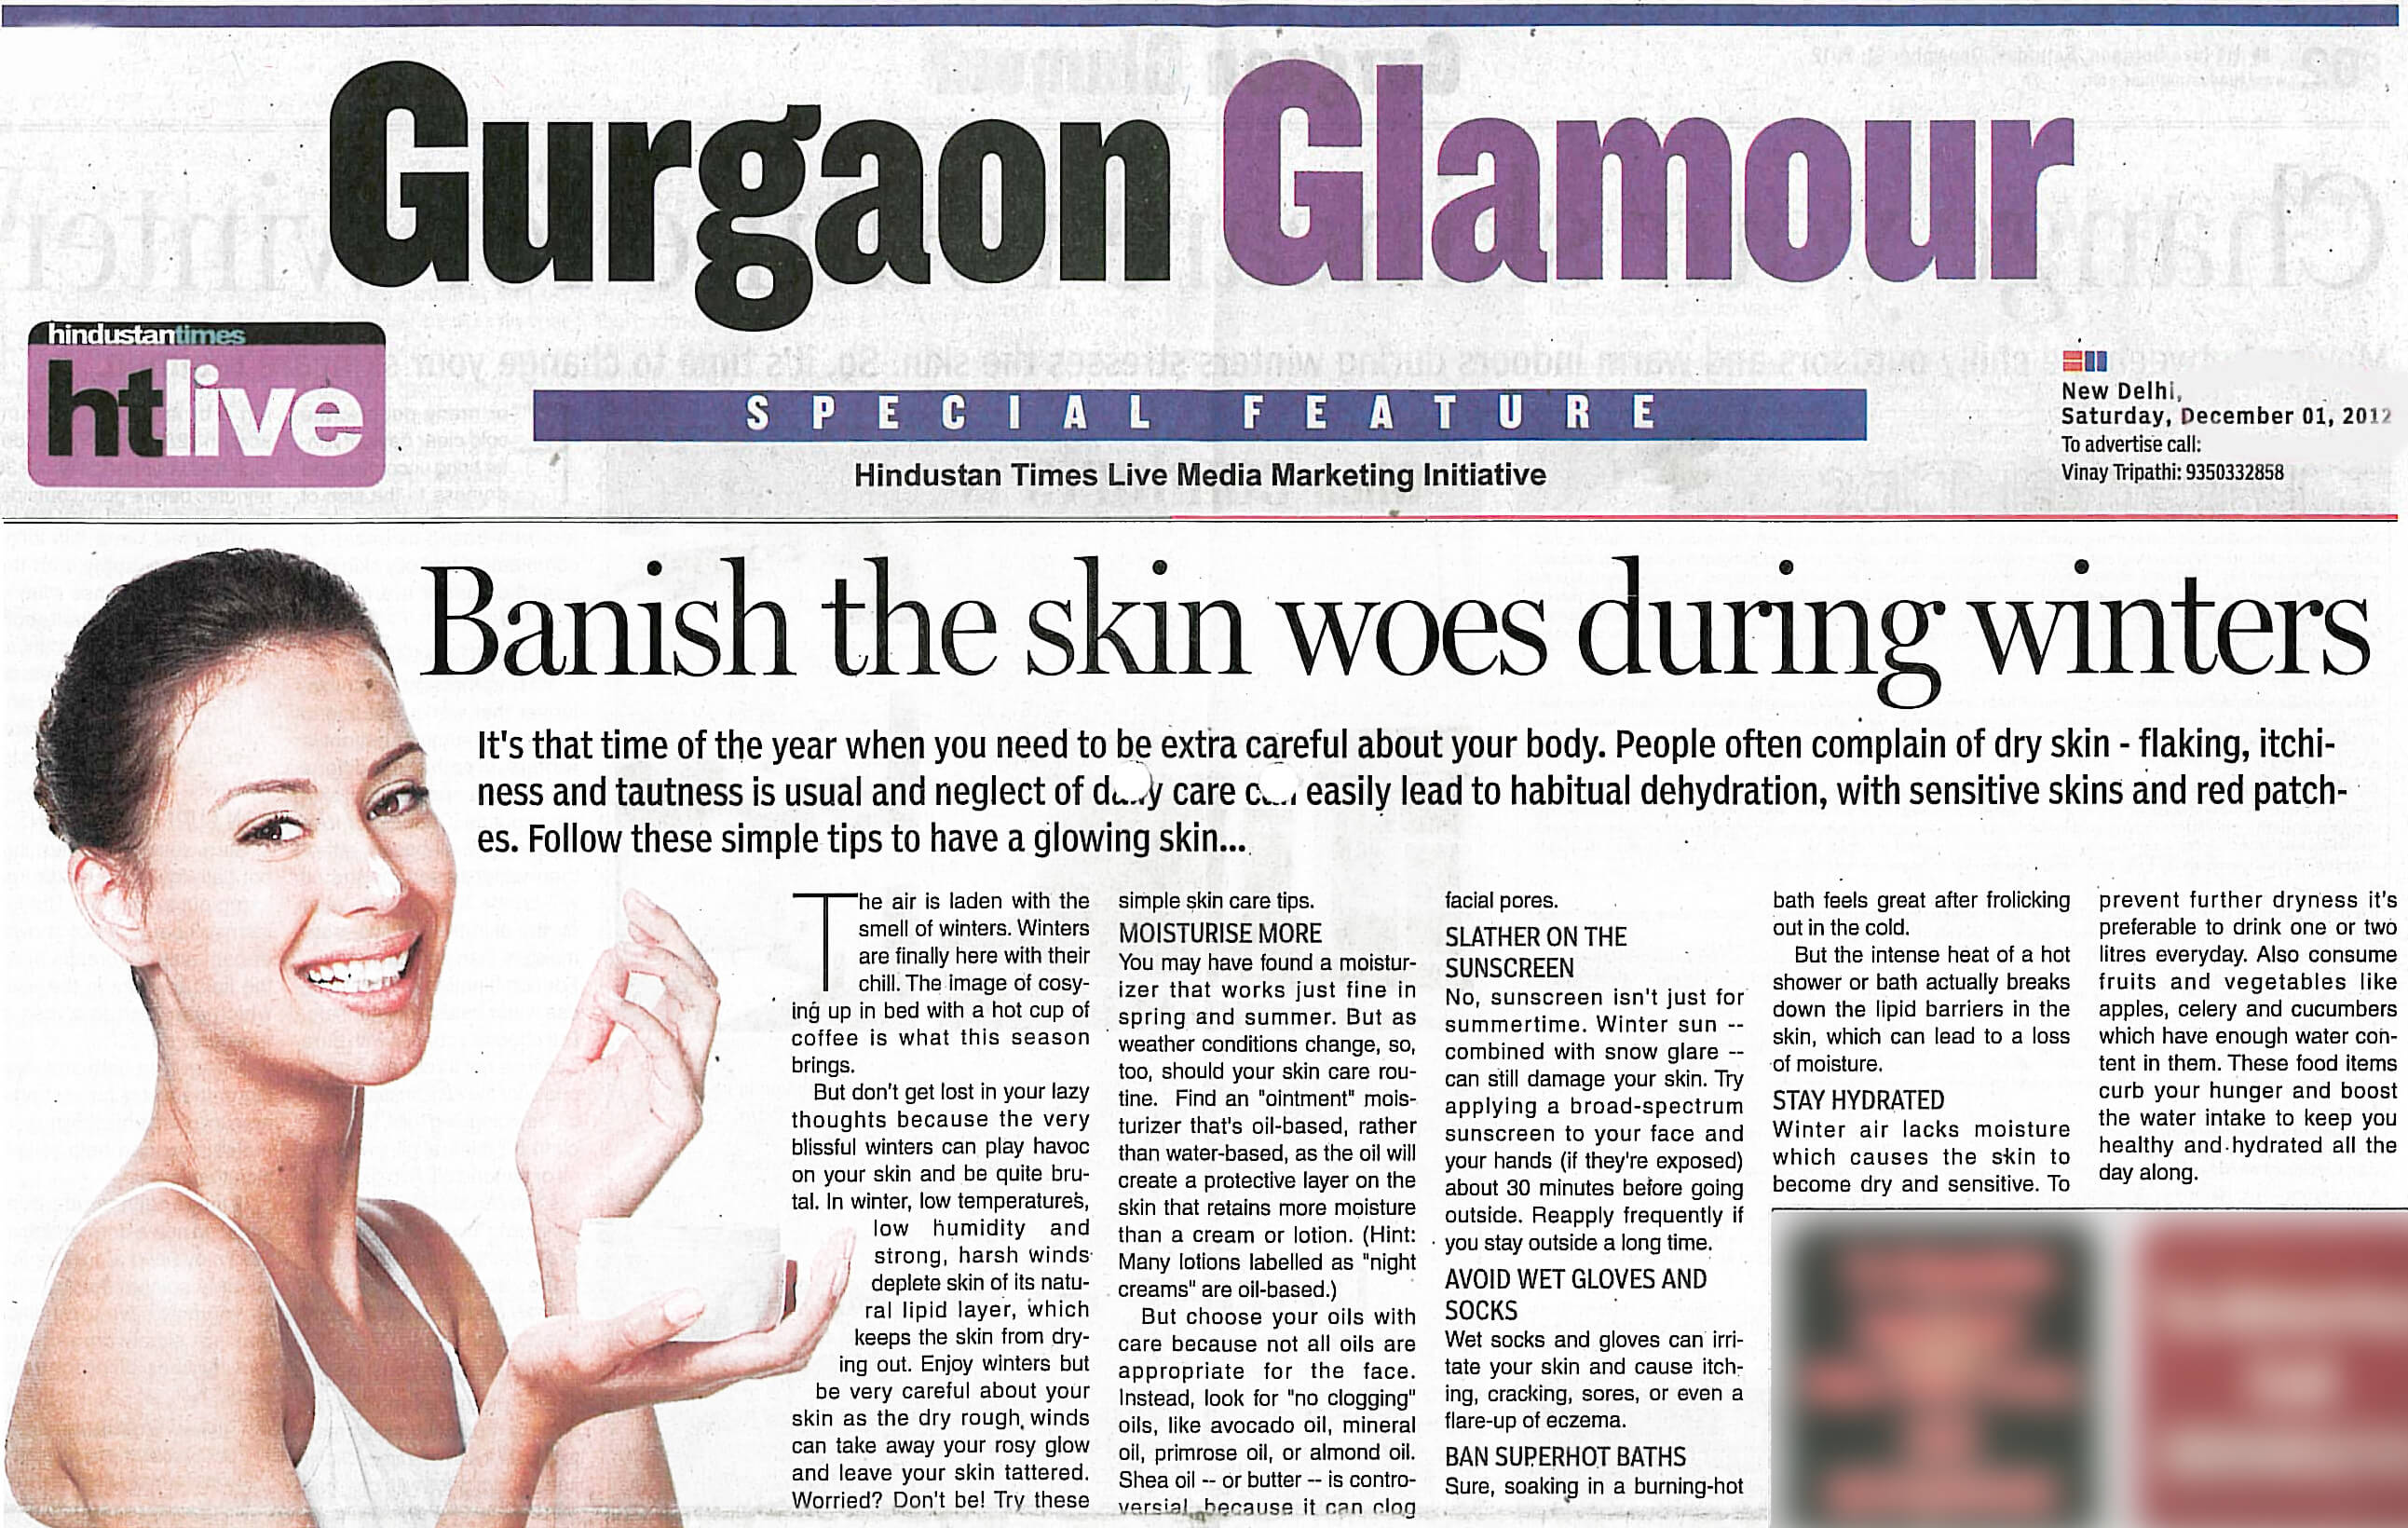 Banish the skin woes during winters